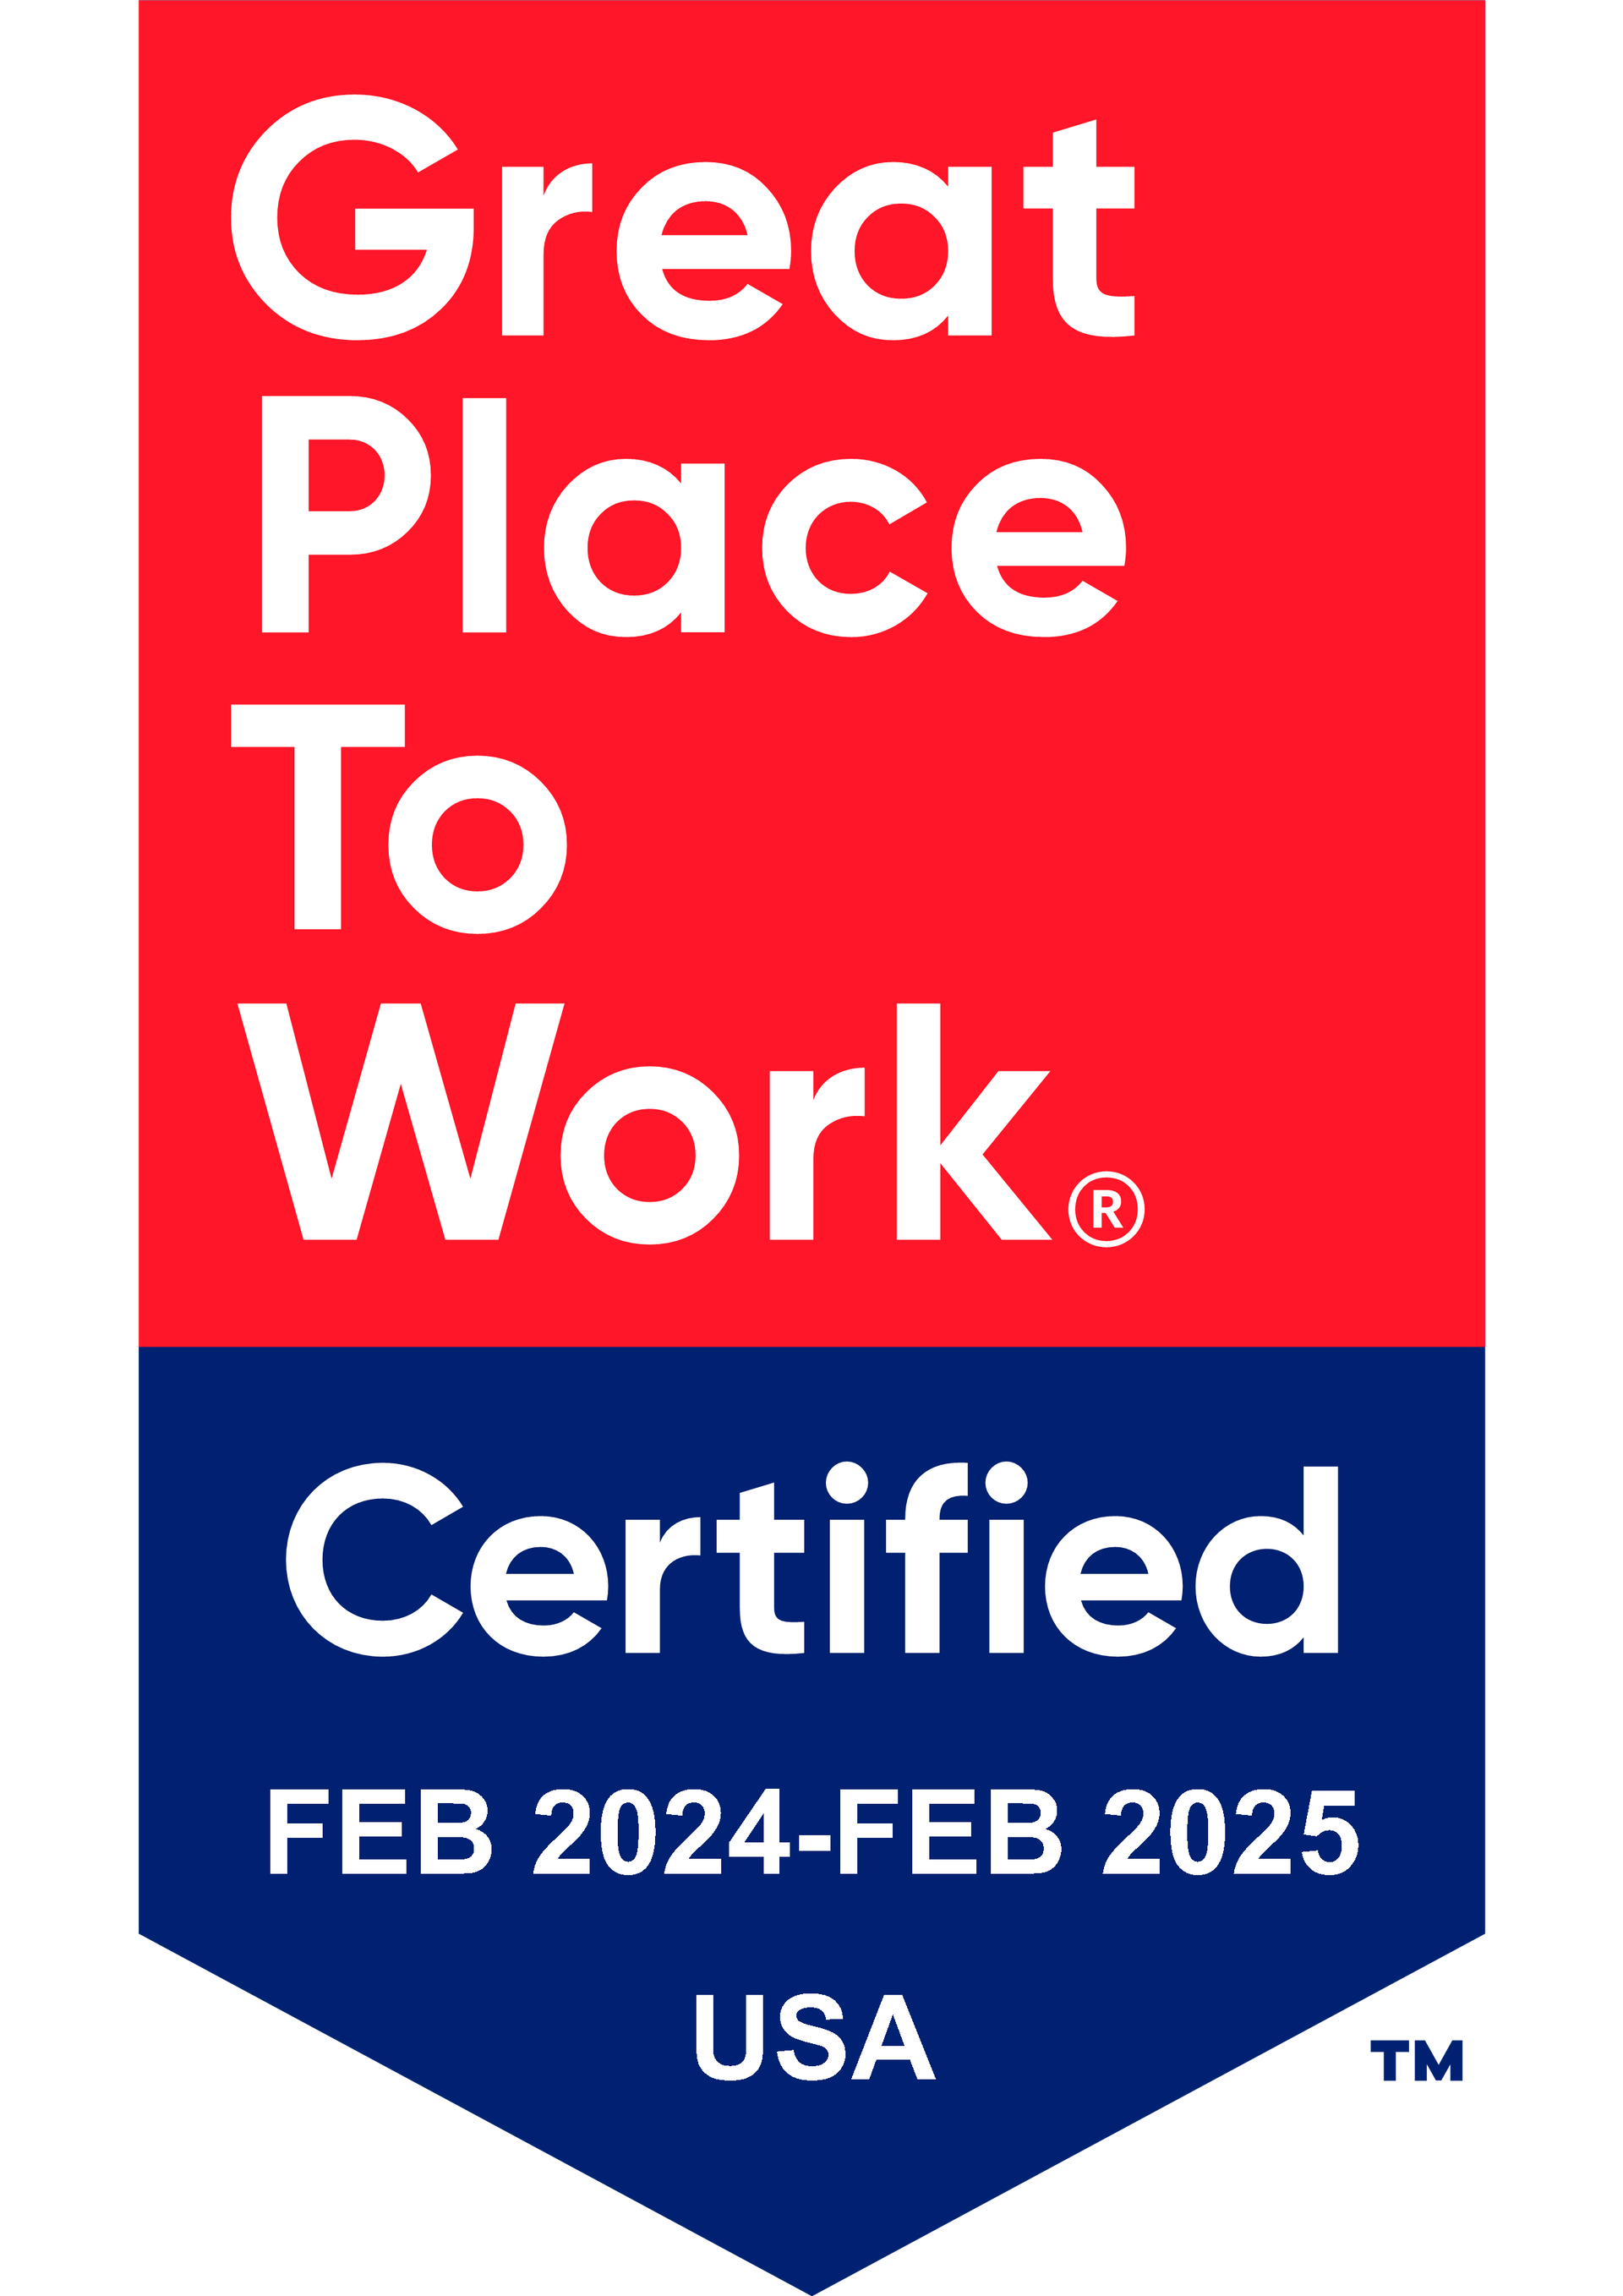 Great Place to Work - Certificate